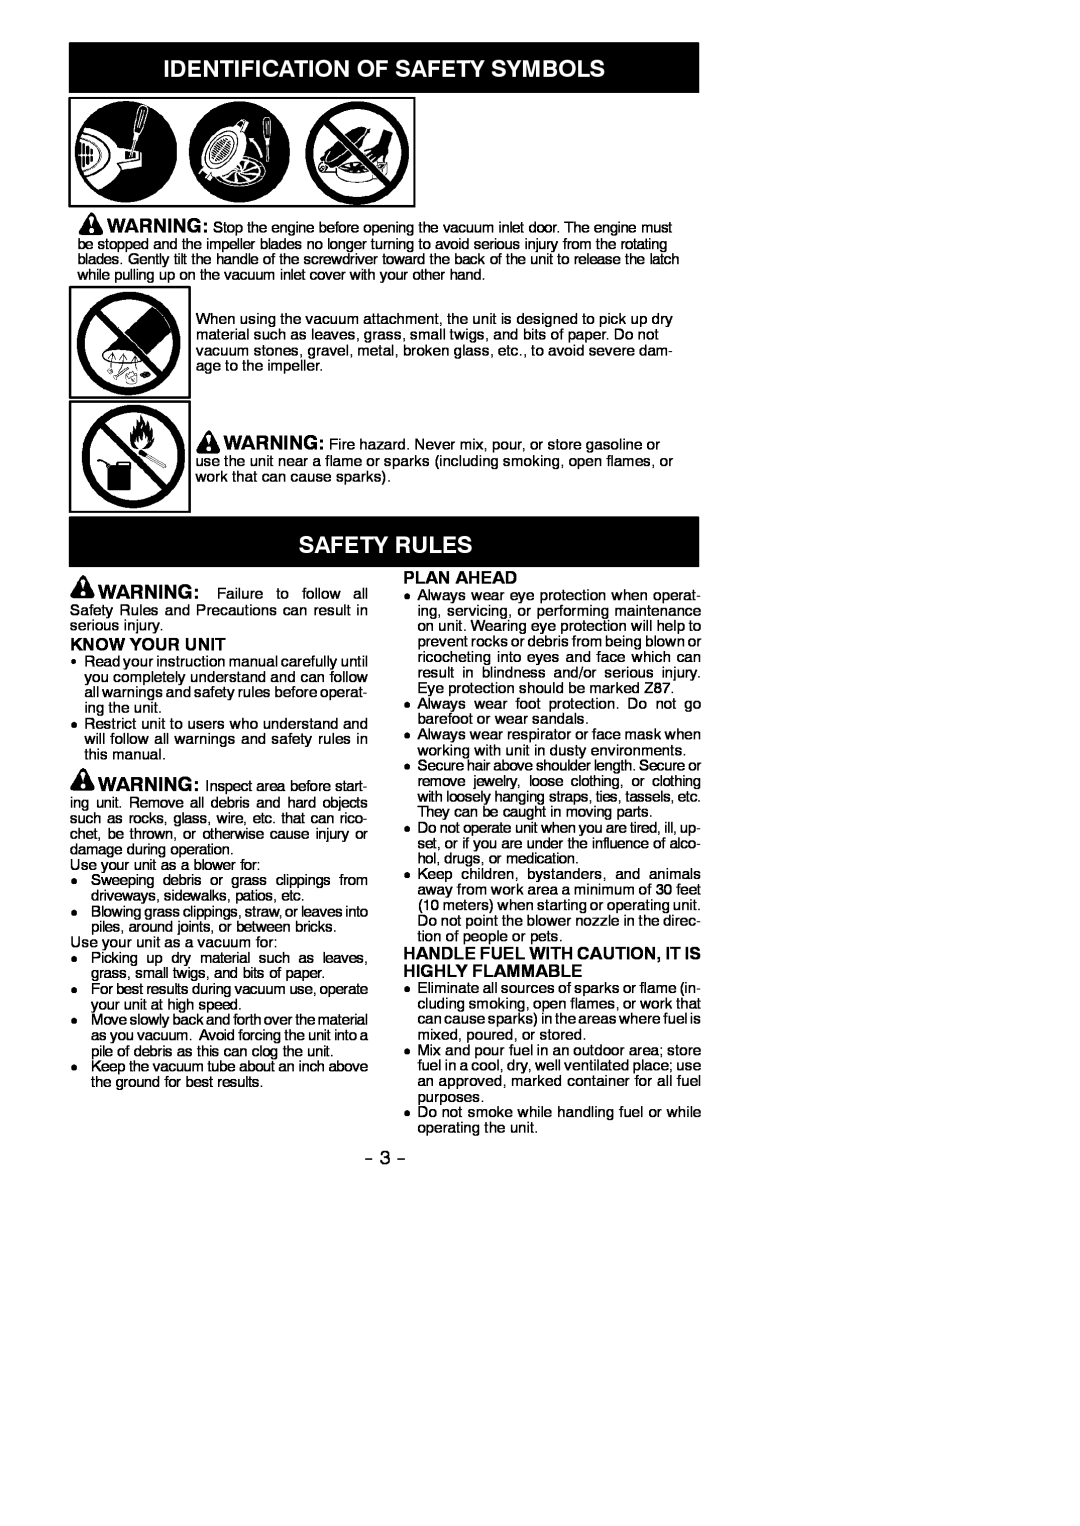 Poulan BVM200 LE instruction manual Safety Rules, Identification Of Safety Symbols, Know Your Unit, Plan Ahead 